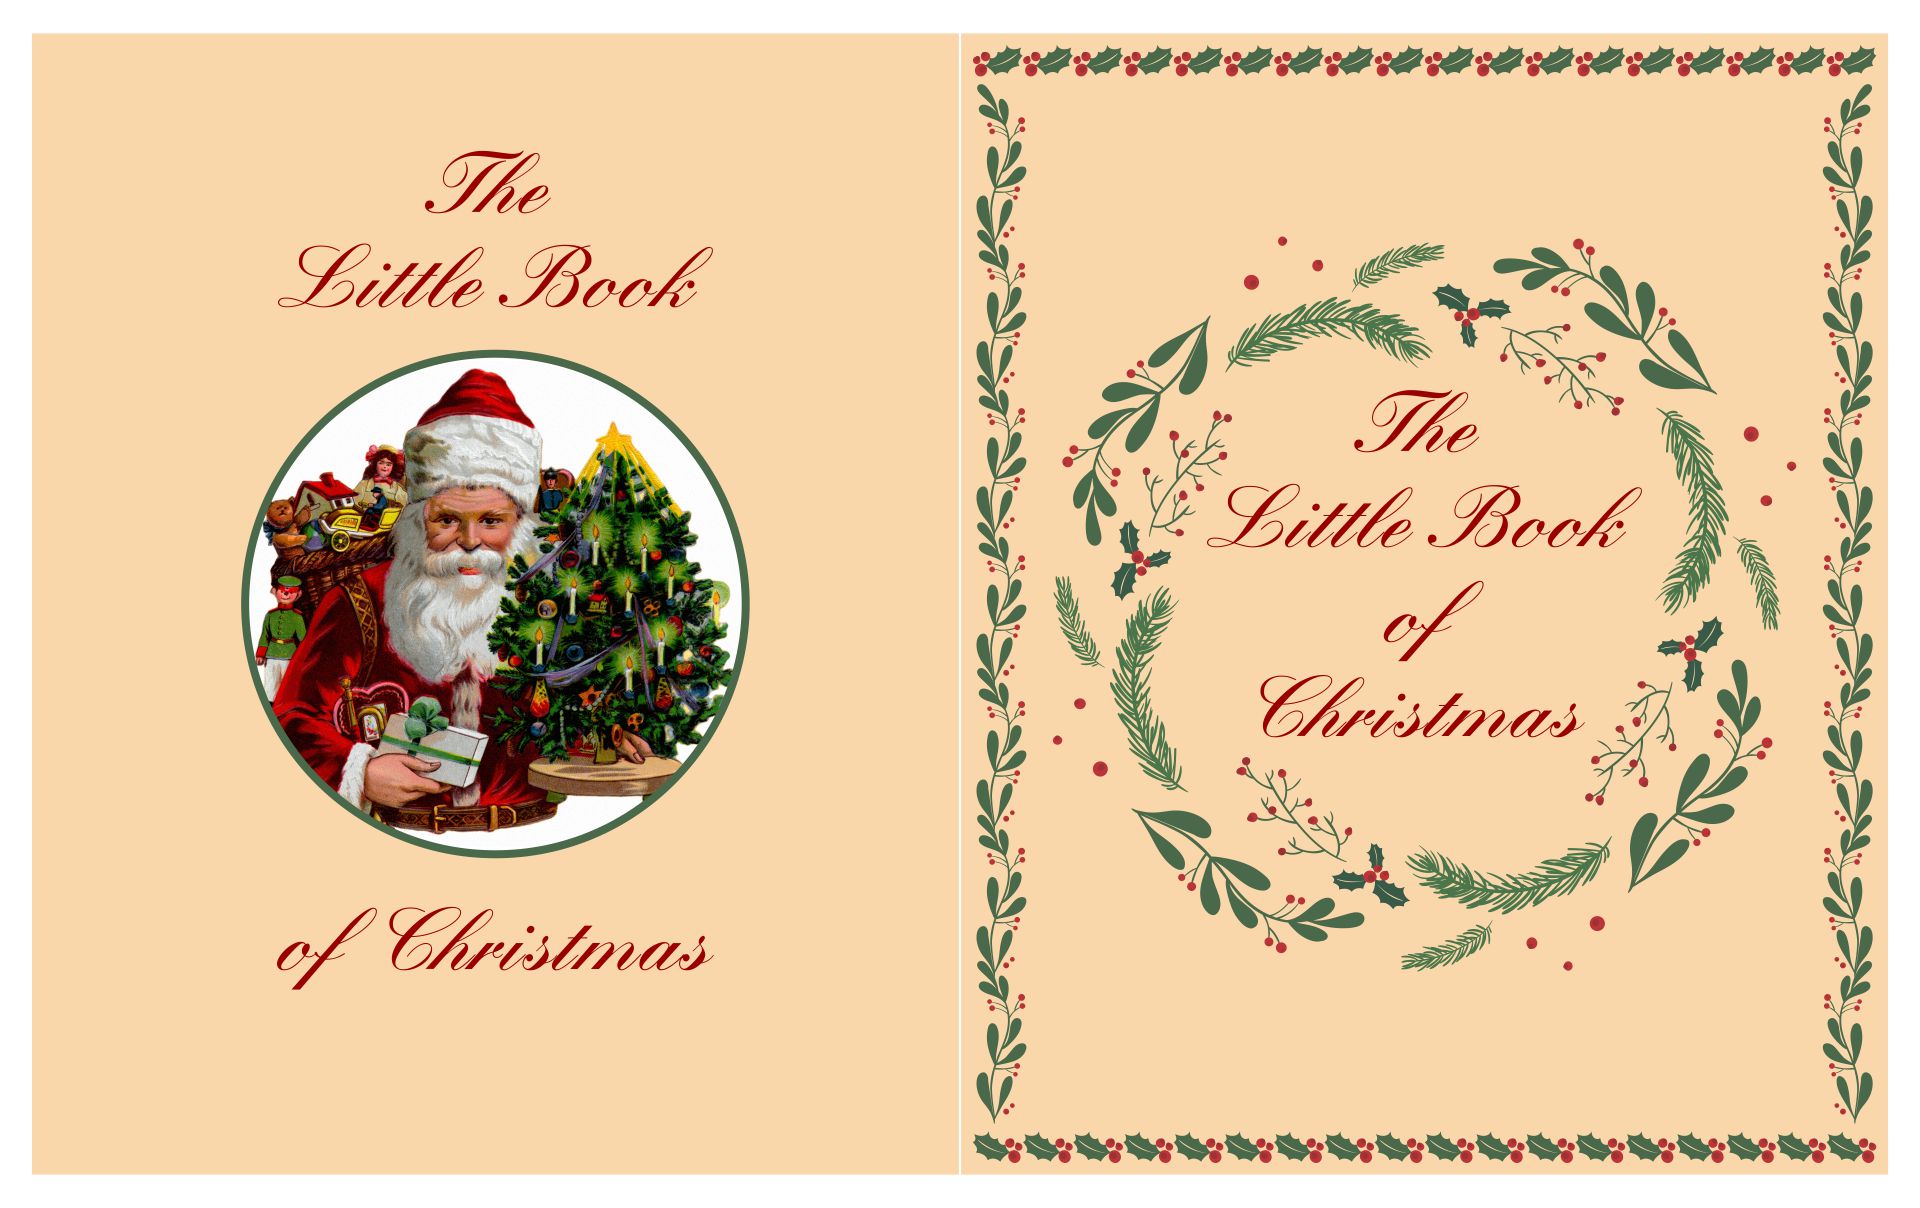 6-best-images-of-christmas-miniature-printable-book-covers-printable